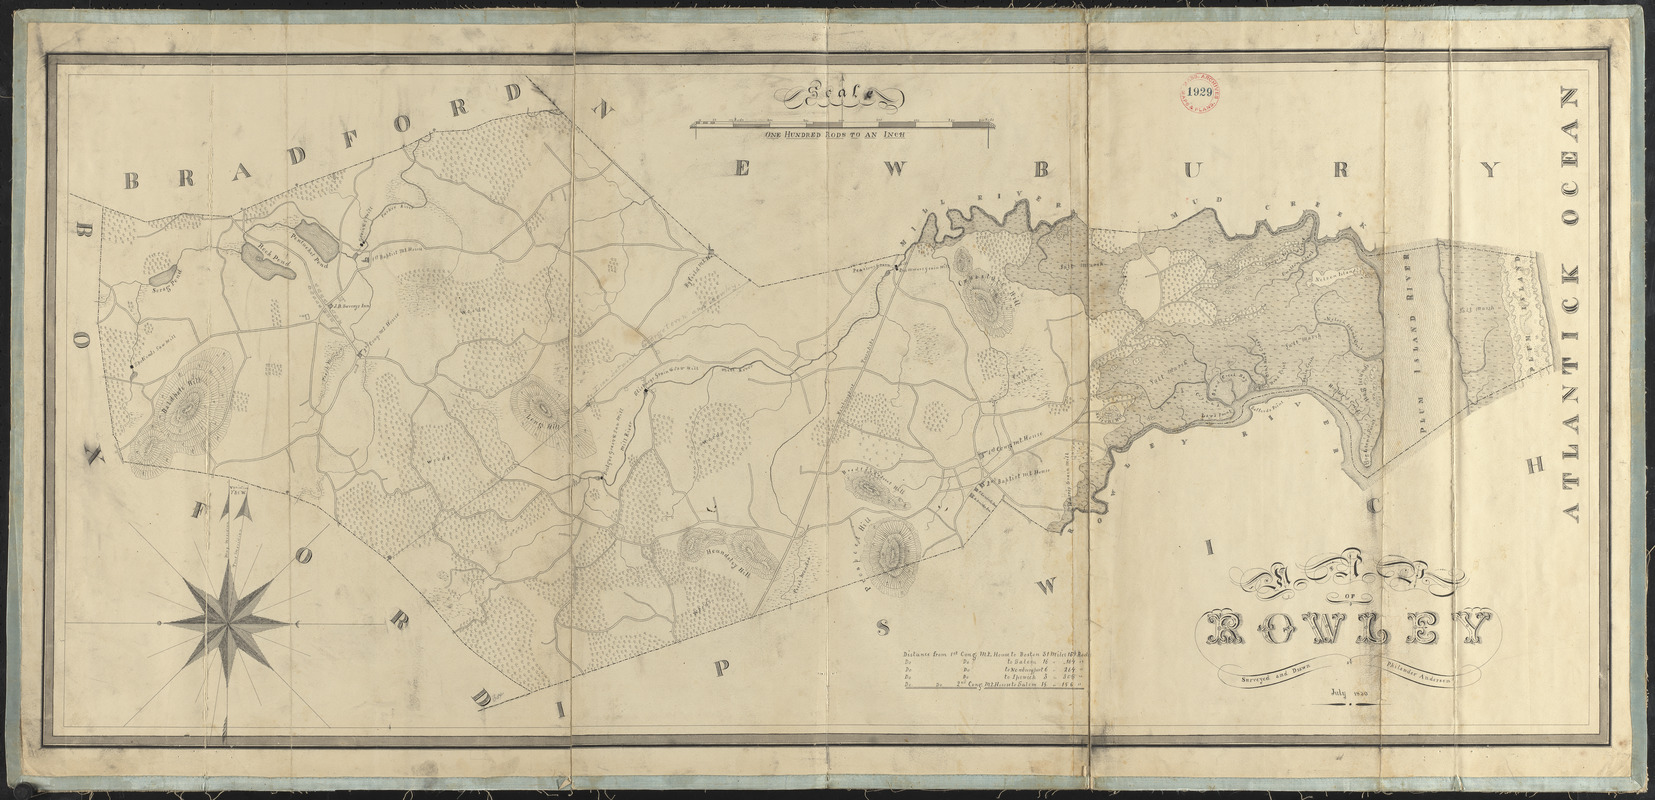 Plan of Rowley made by Philander Anderson, dated July 1830